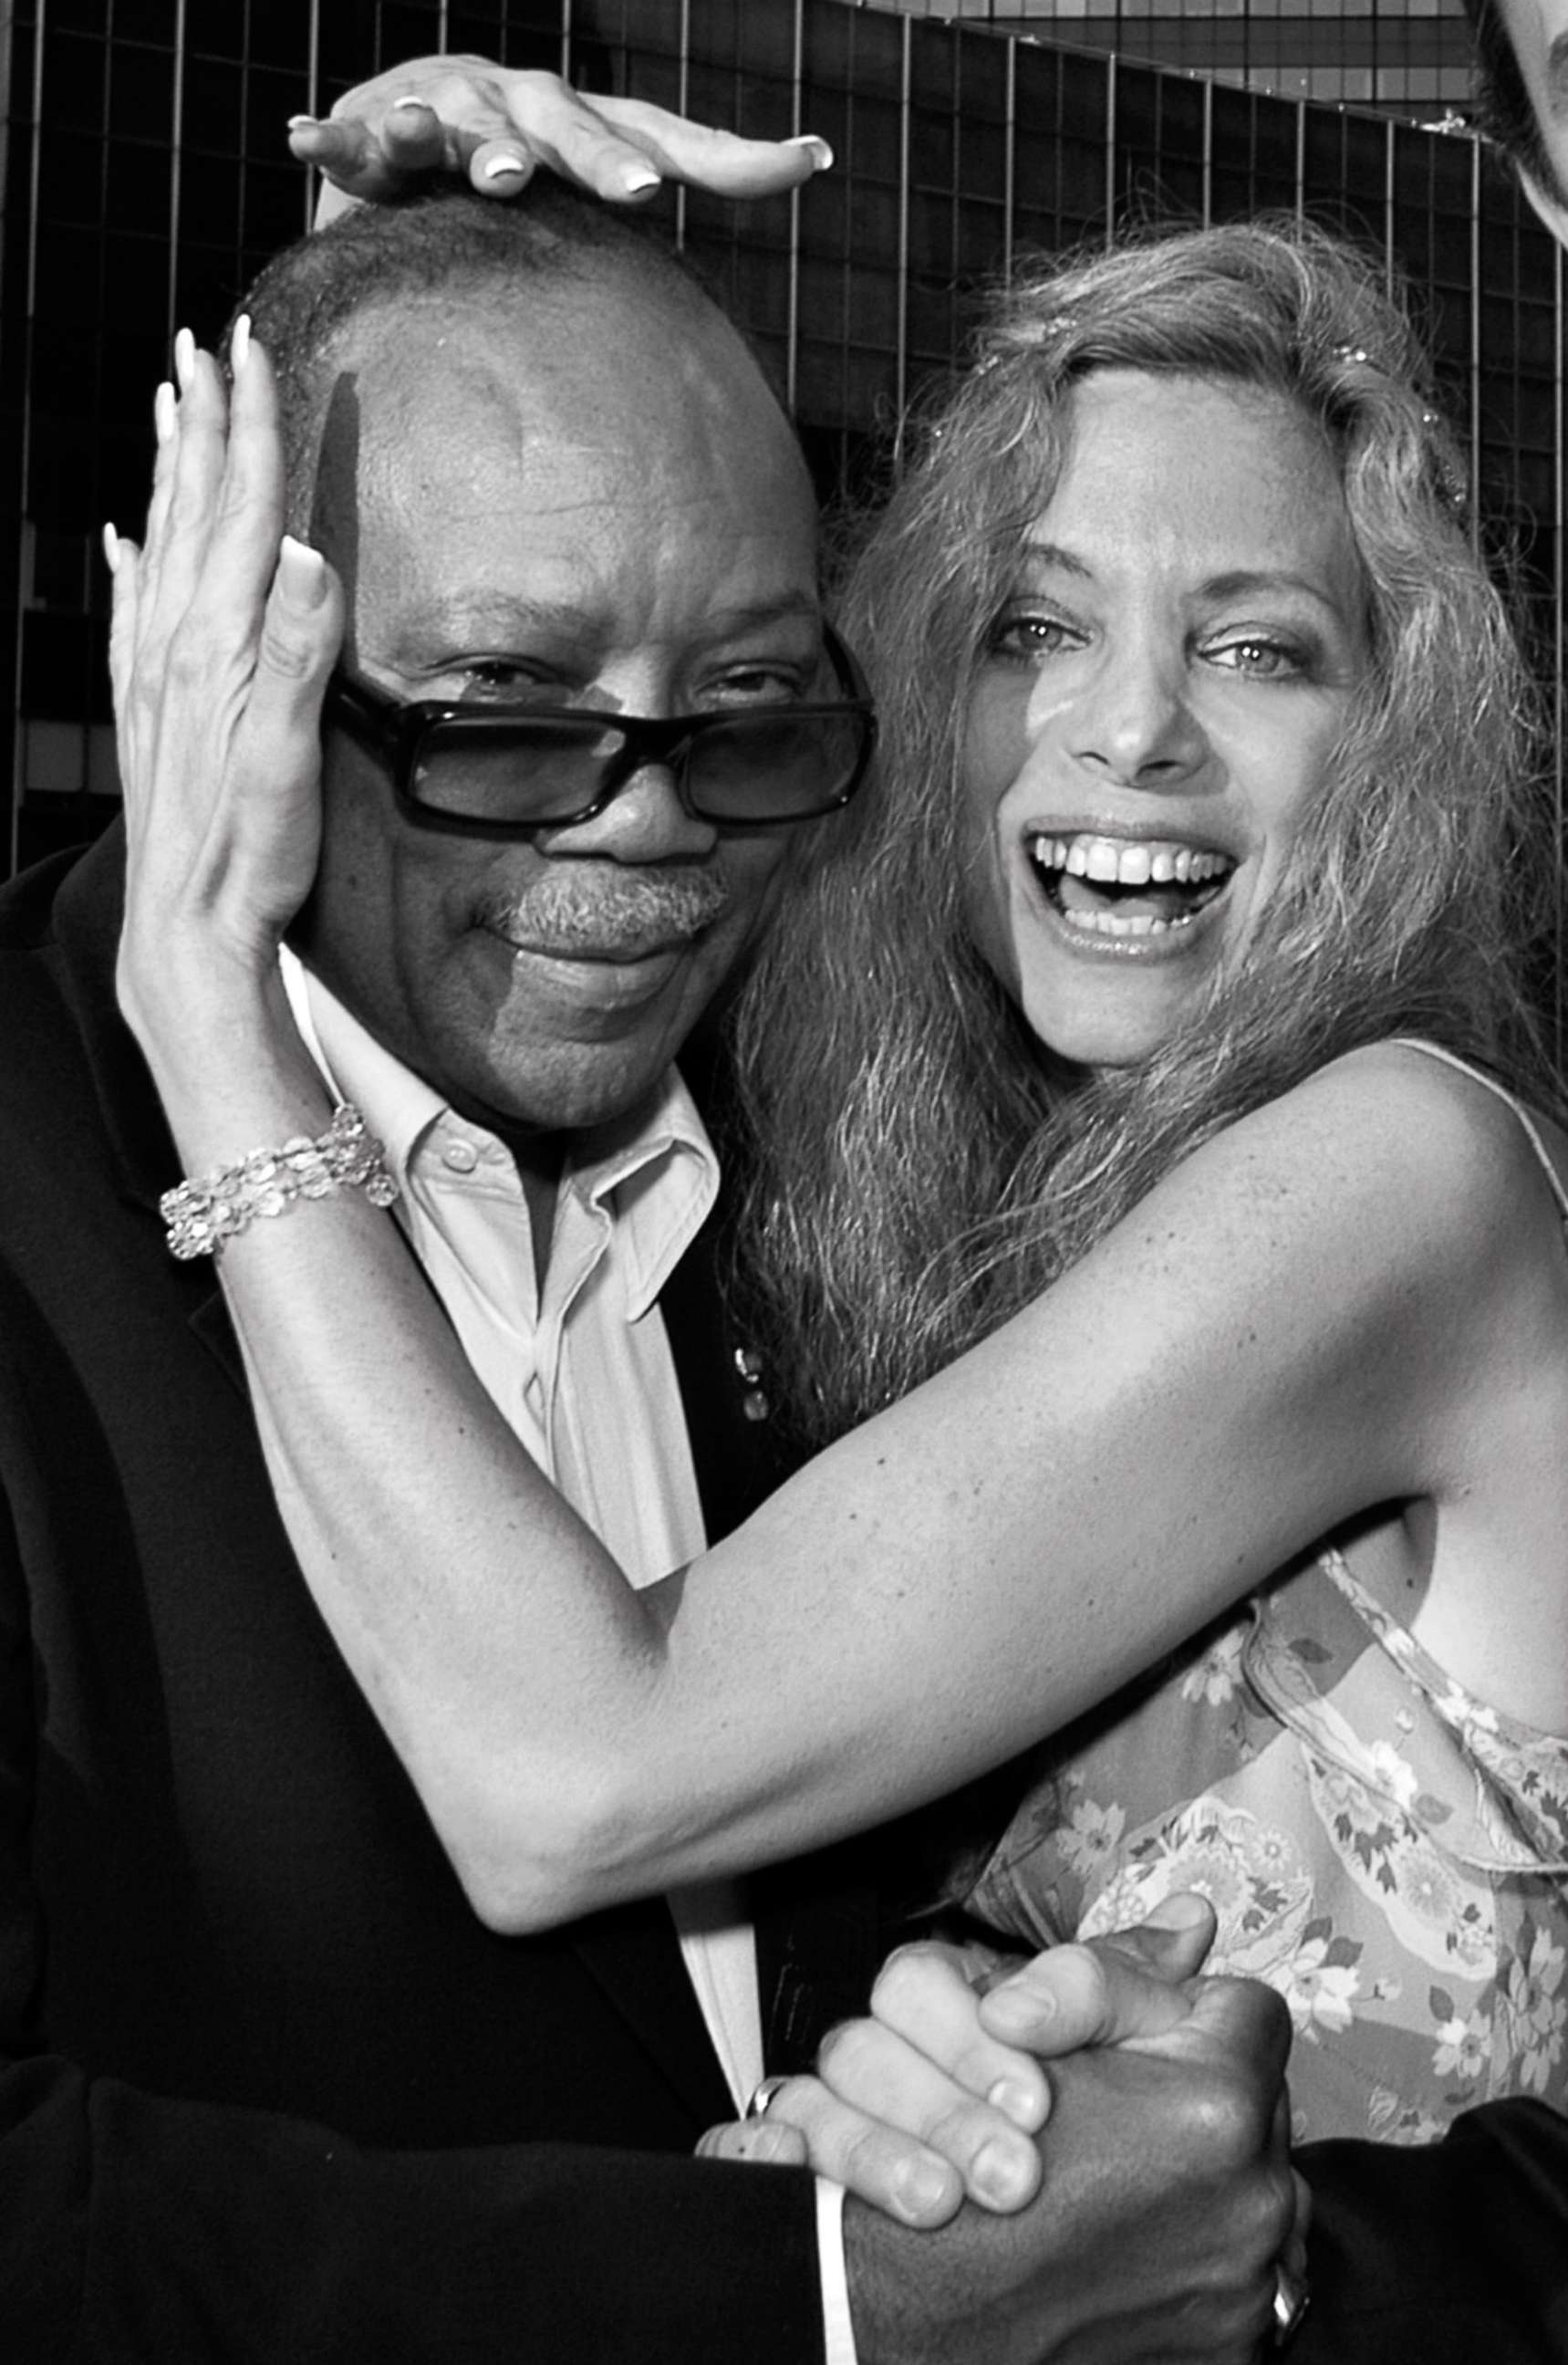 PHOTO: Wendy Oxenhorn poses for a photo with artist Quincy Jones in an undated handout photo.